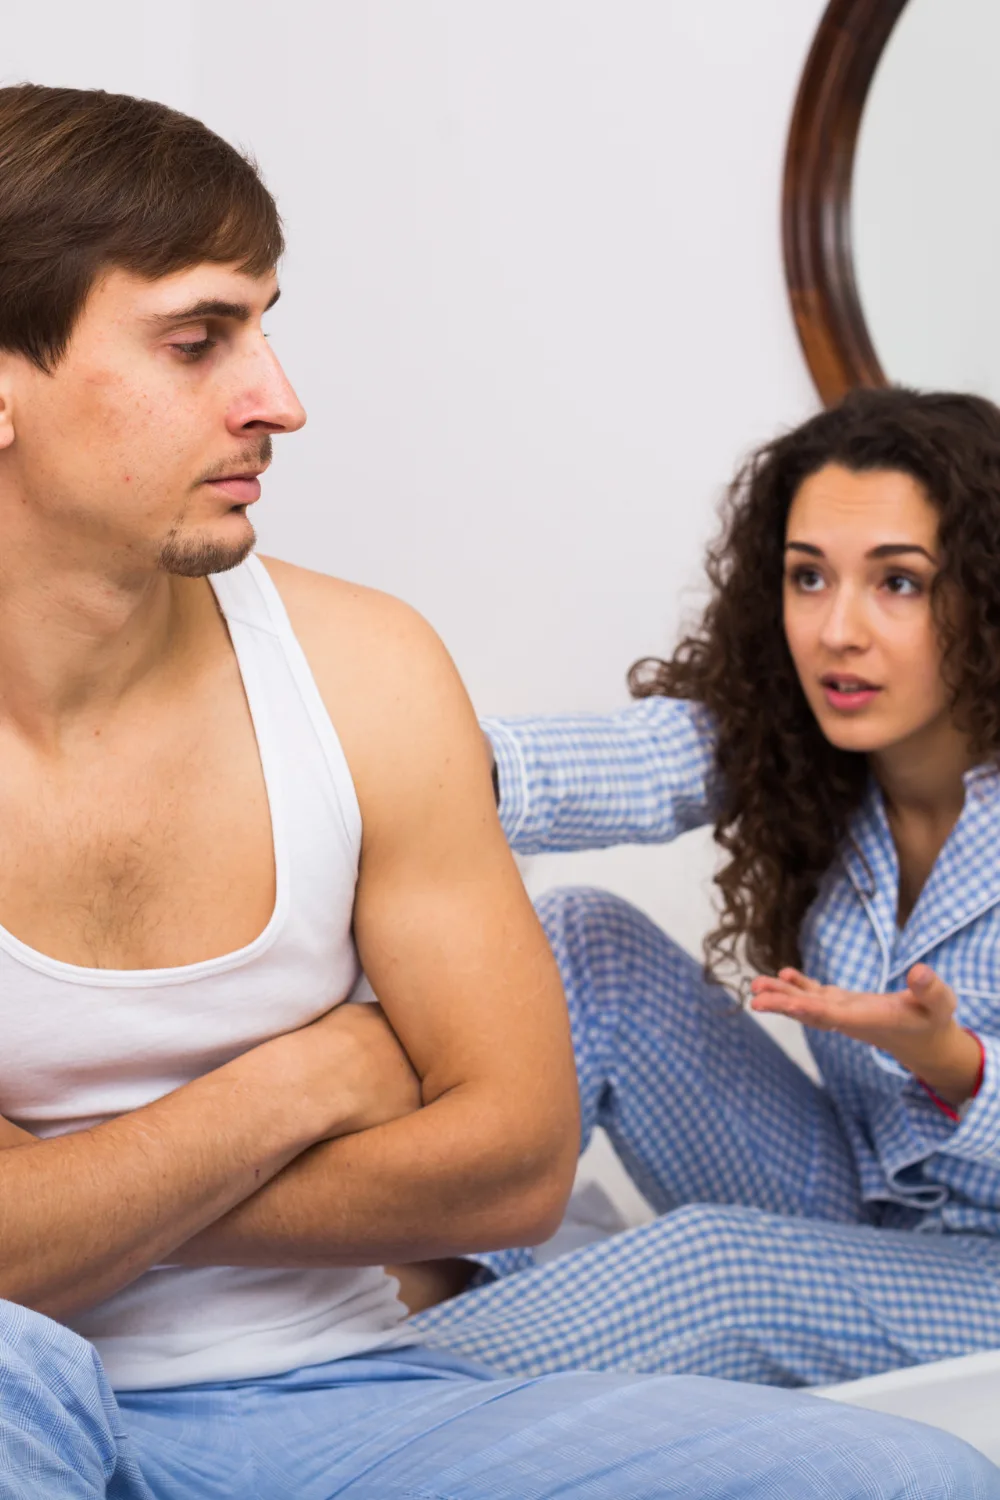 My Husband Gets Angry If I Disagree With Him